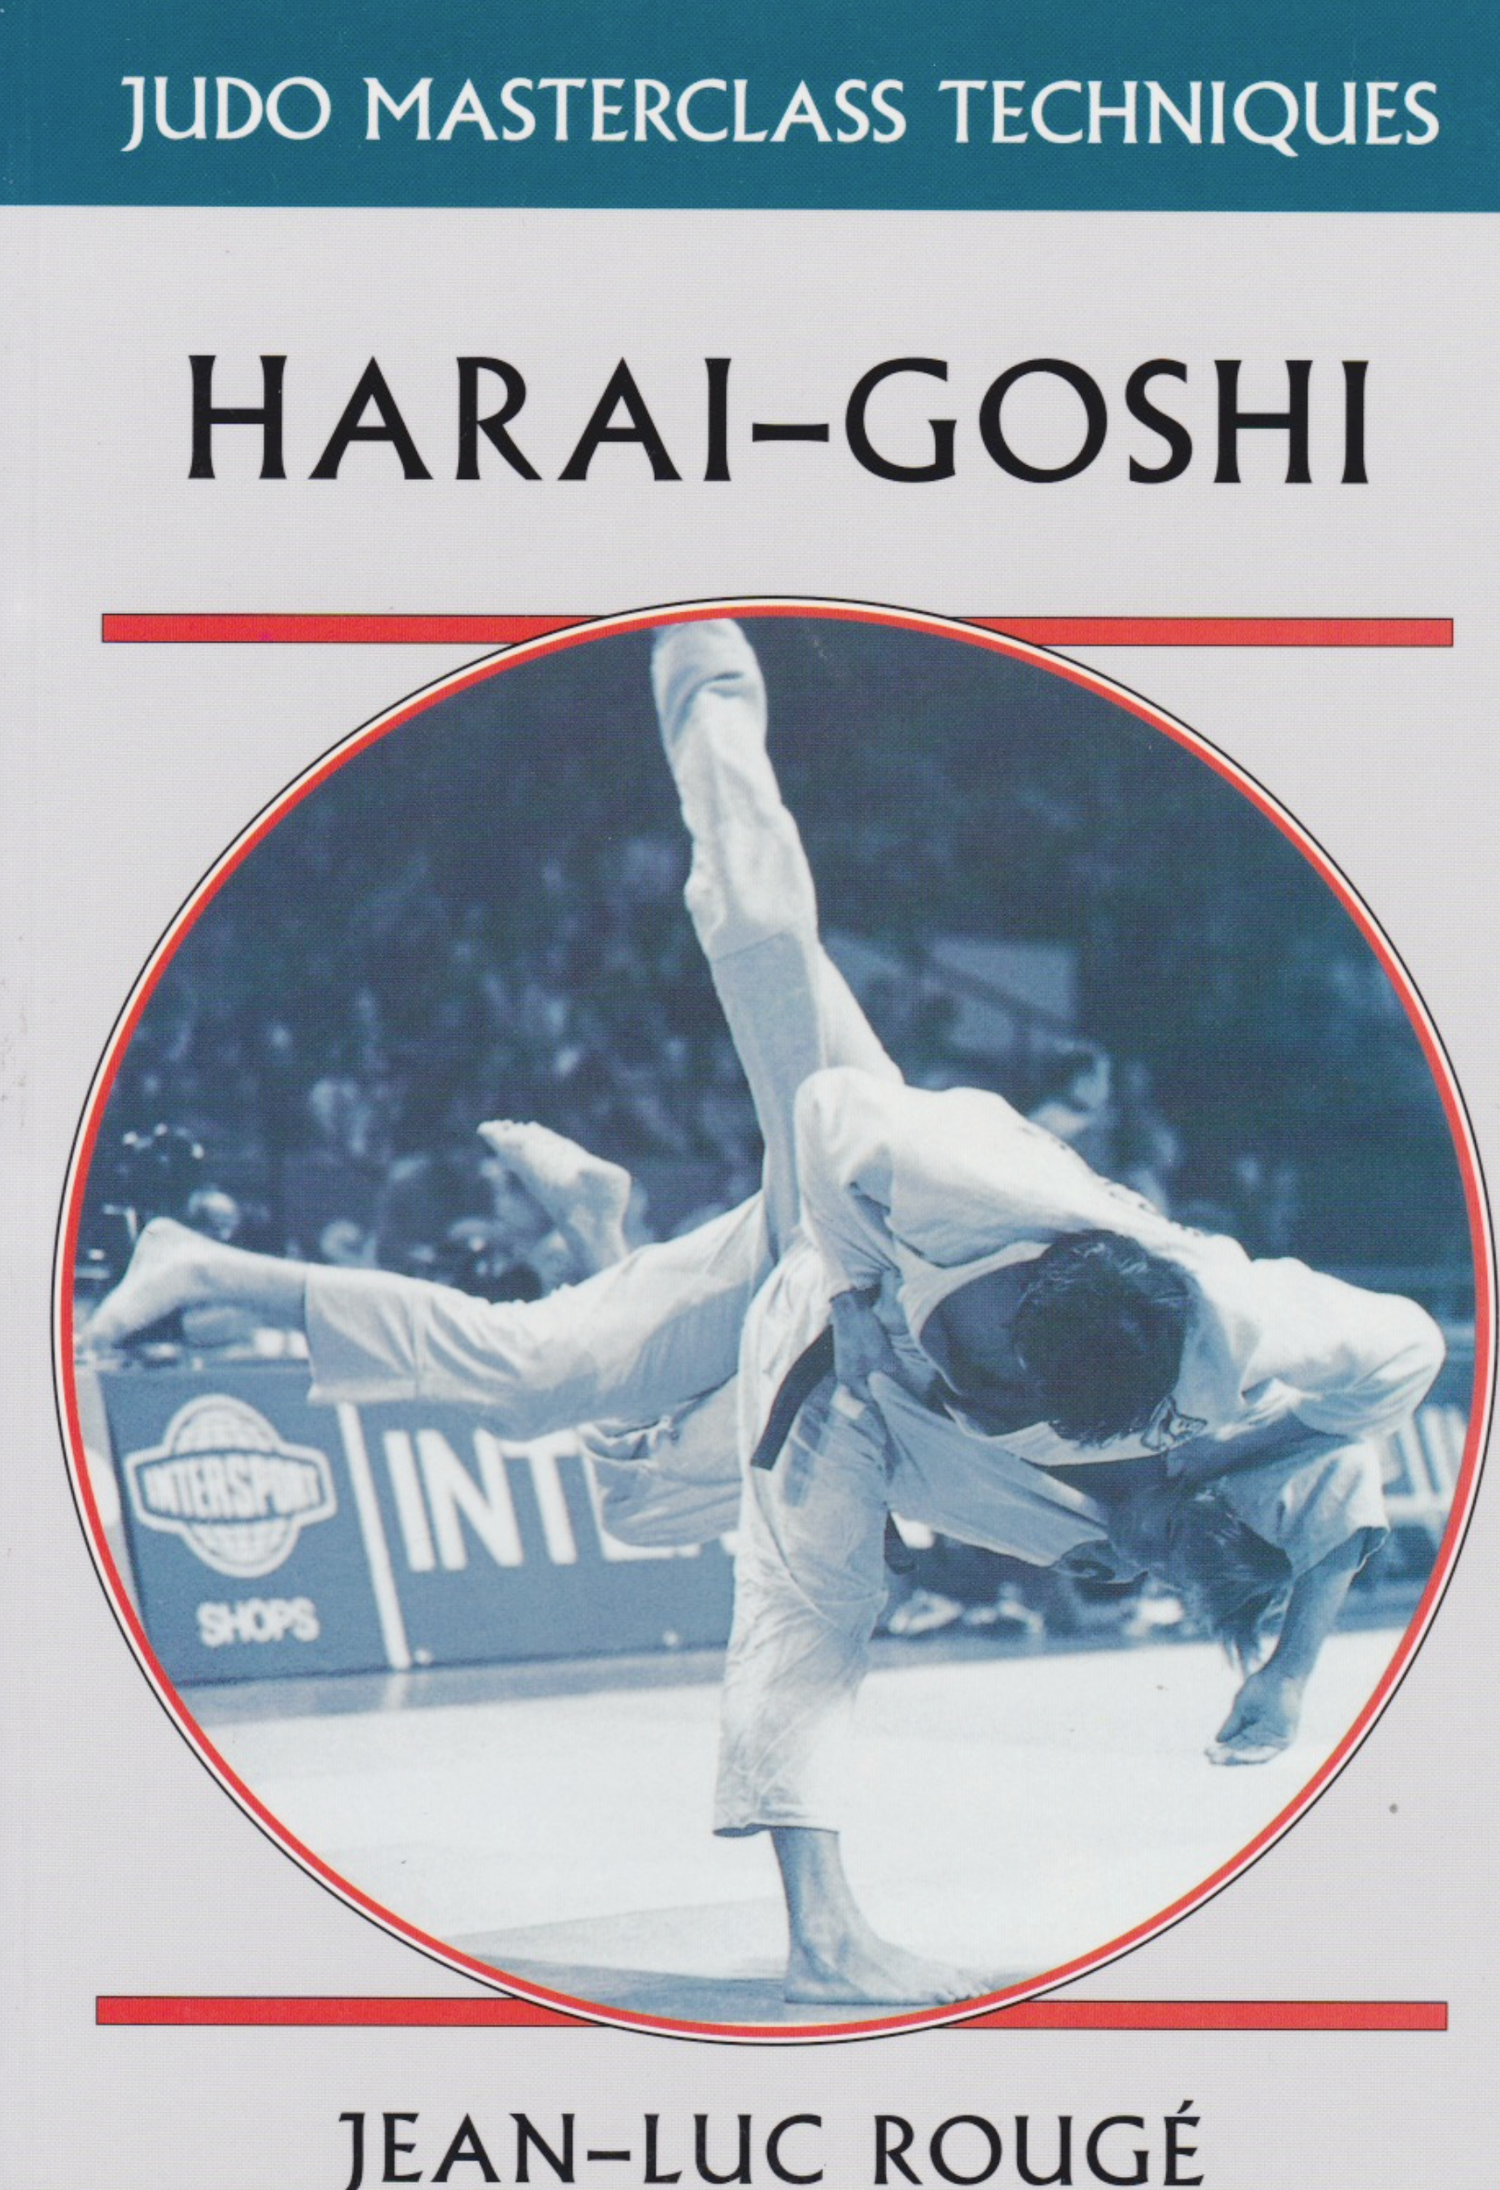 Harai-Goshi: Judo Masterclass Book by Jean-Luc Rouge (Preowned) - Budovideos Inc